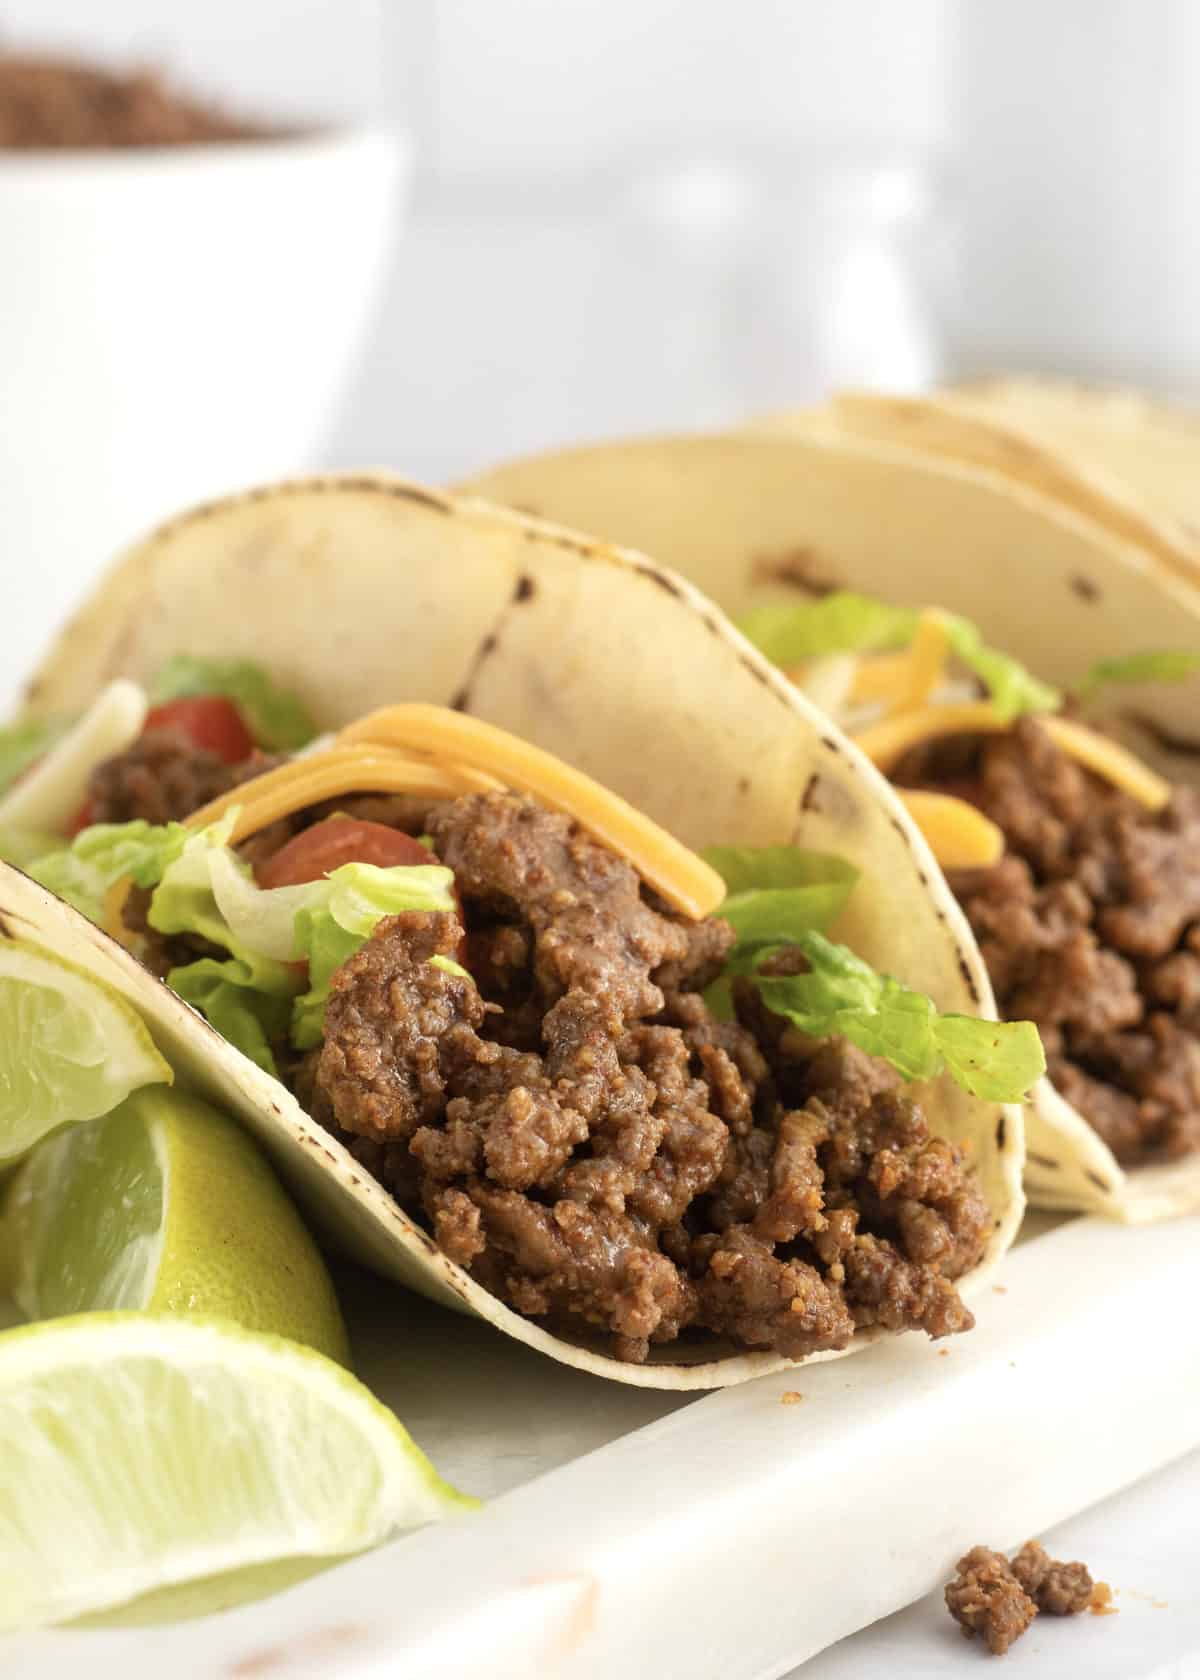 How to Make Ground Beef for Tacos